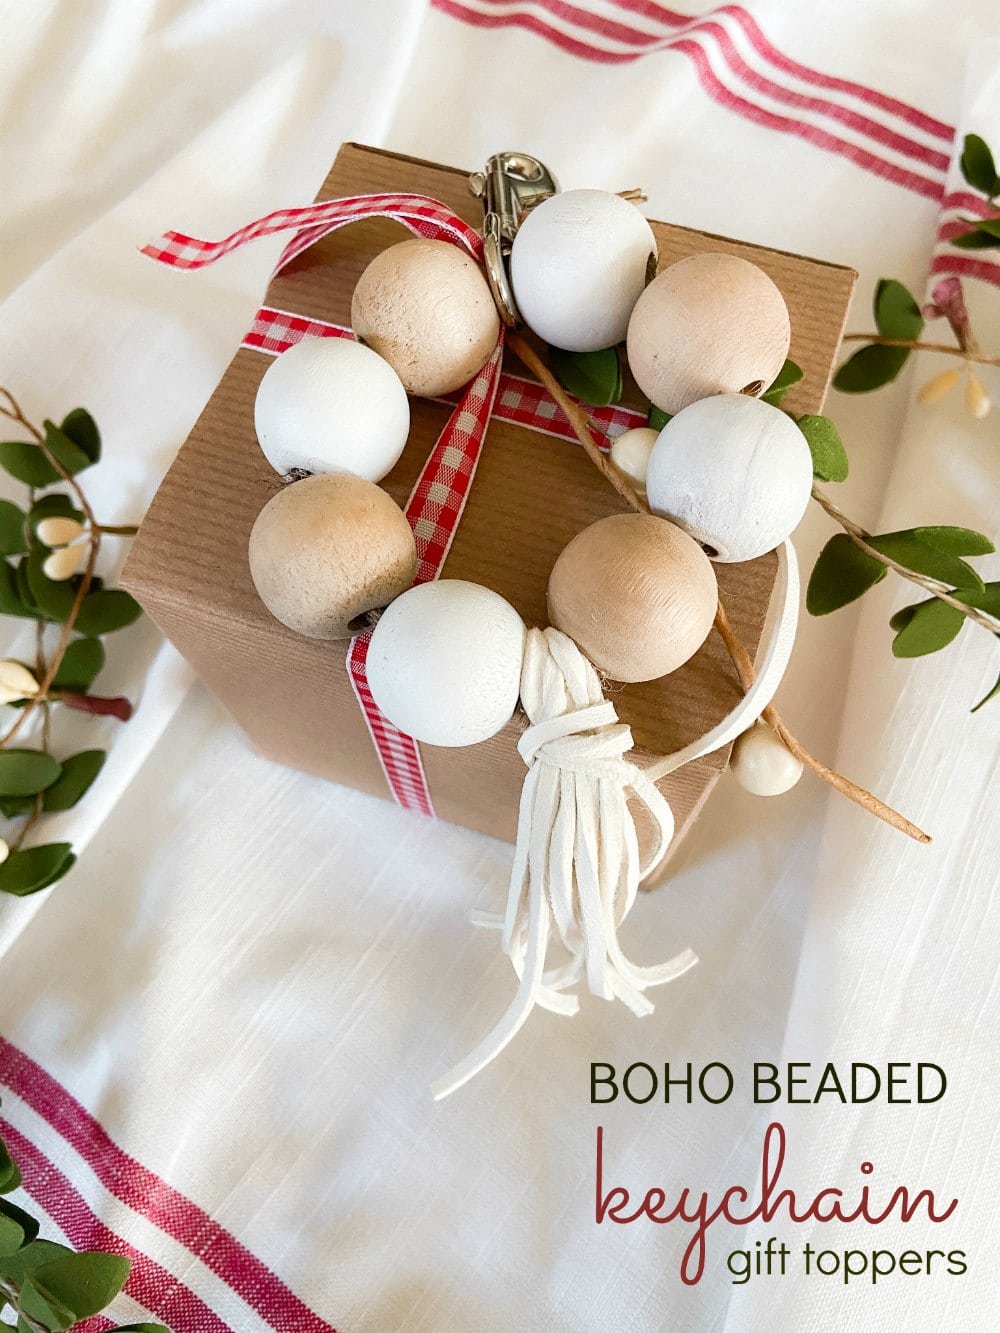 Boho Beaded Keychain Holiday Gift Toppers. Use beads, ribbon and twine to make the cutest handmade keychains that also make adorable gift toppers for the holidays.